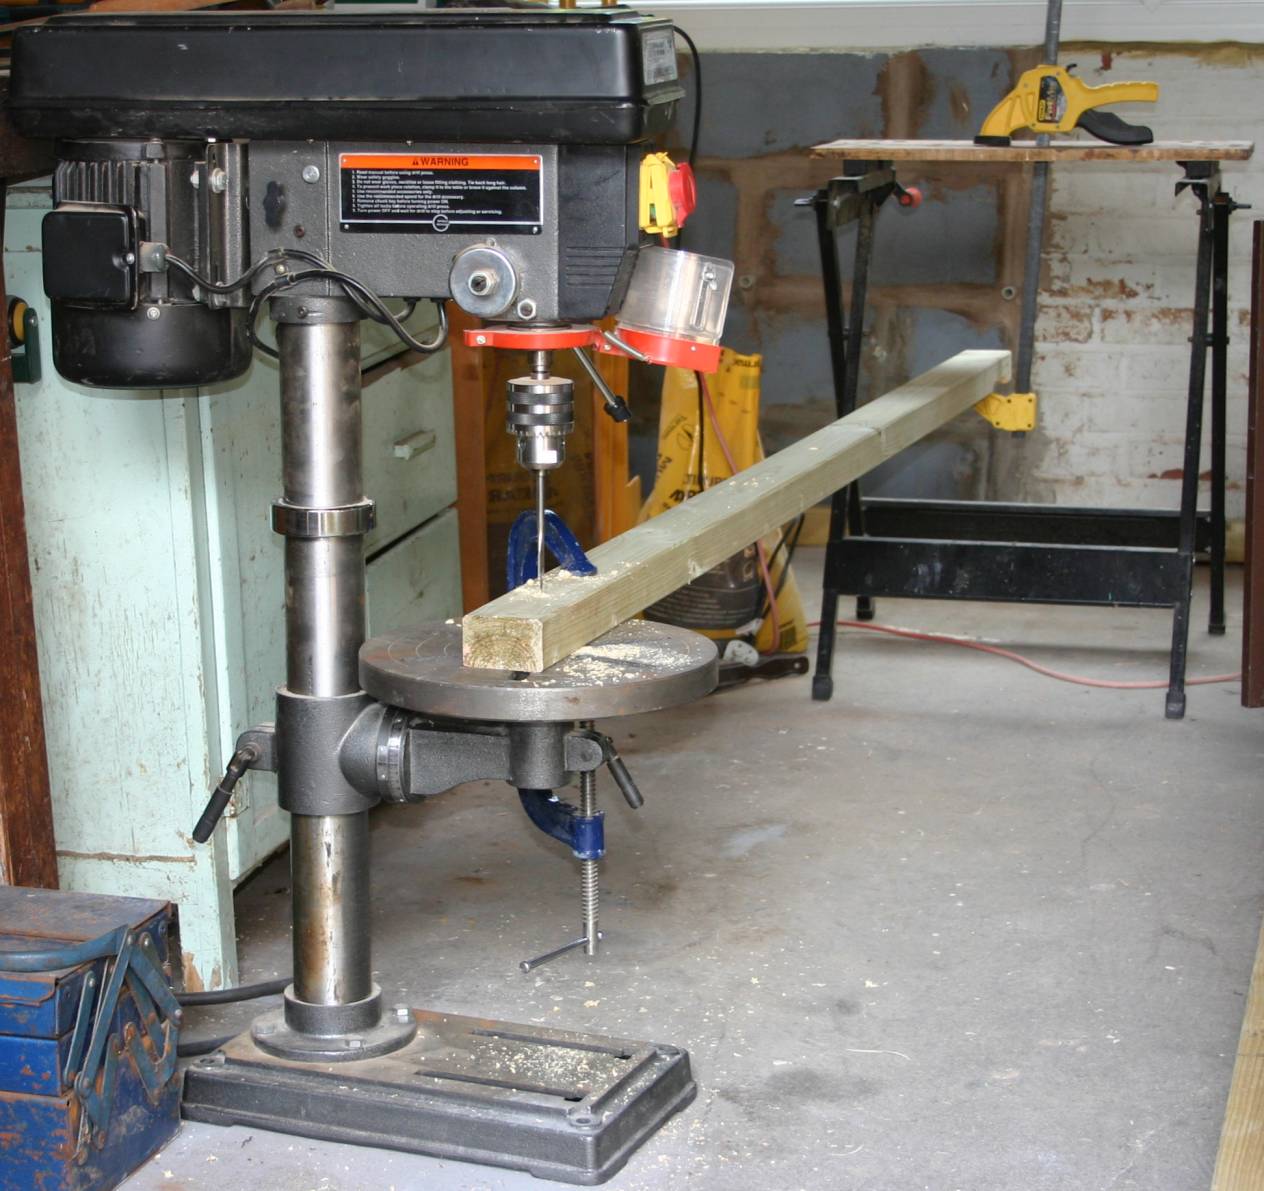 Jig used for accurate drilling of studs.